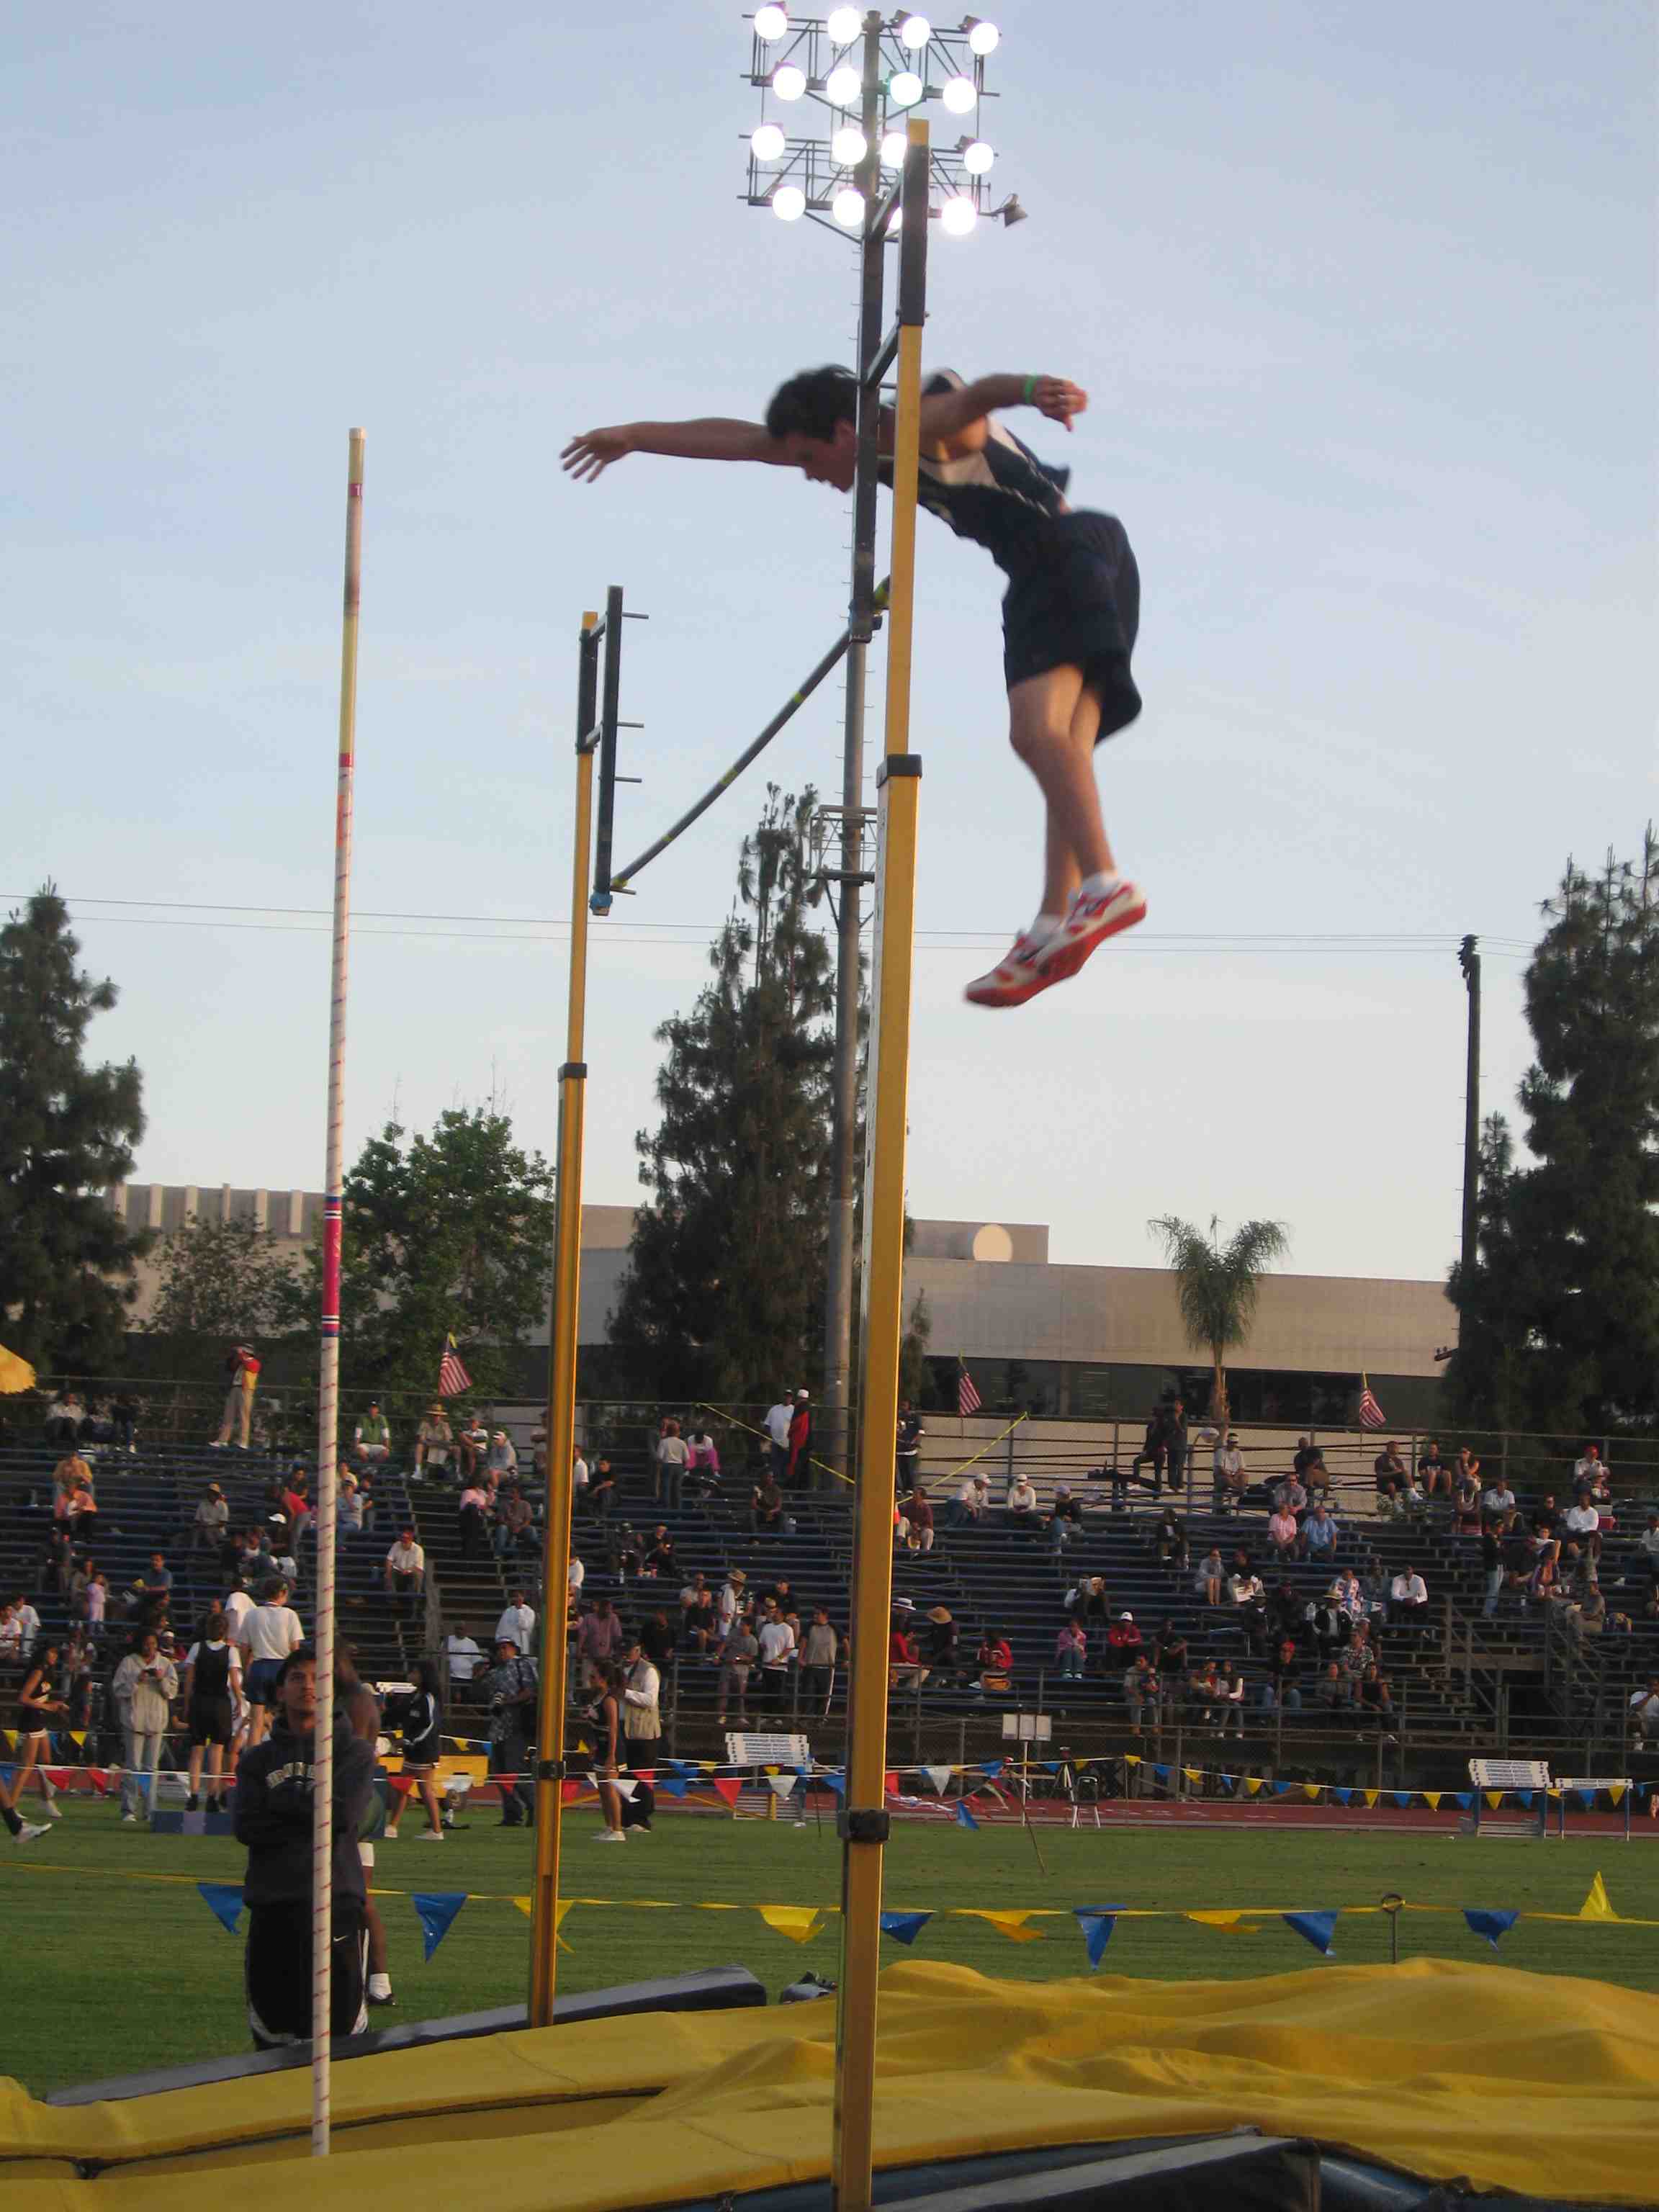 Palisades High senior Bryan Greenberg goes up and over the bar on his way to winning his second straight City pole vault title.  Photo: Debbie Price